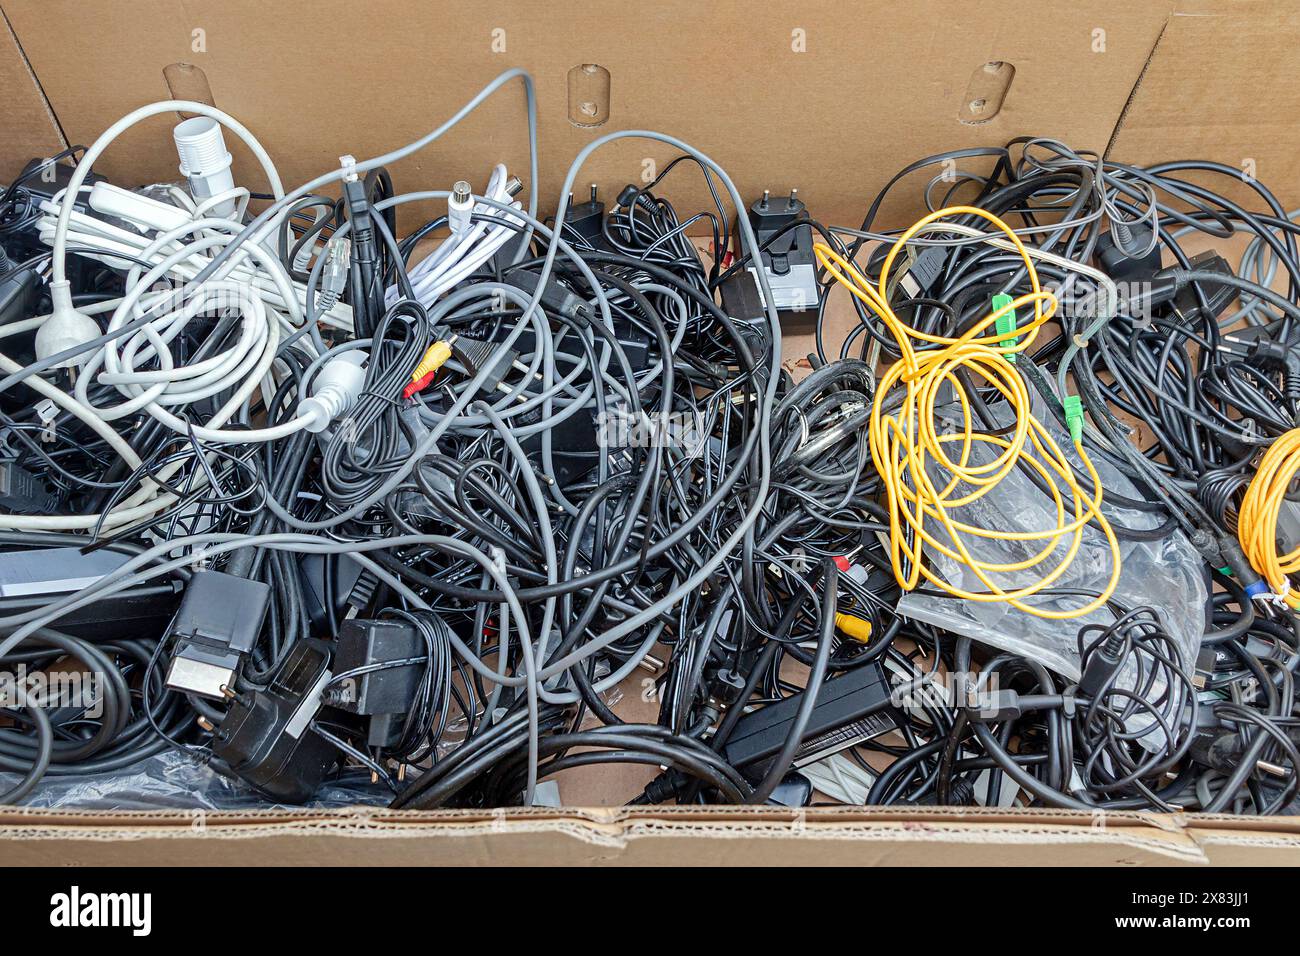 Pile of chargers with tied cables inside cardboard box Stock Photo